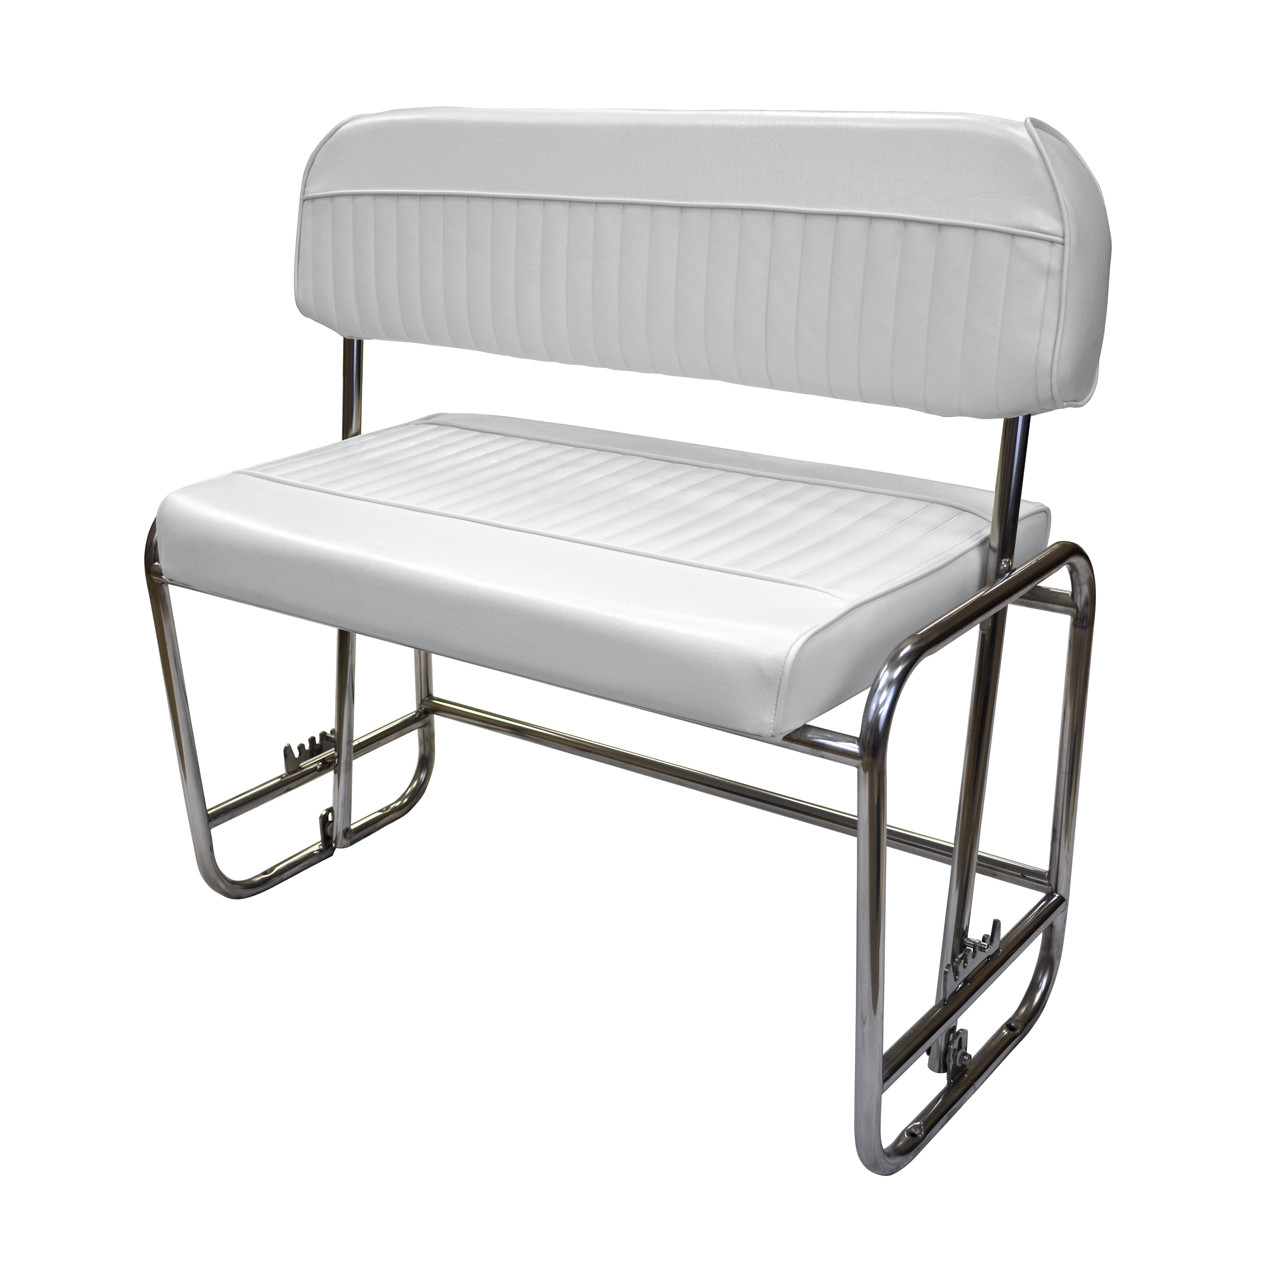 Wise | Swingback Stainless Steel Cooler Seat